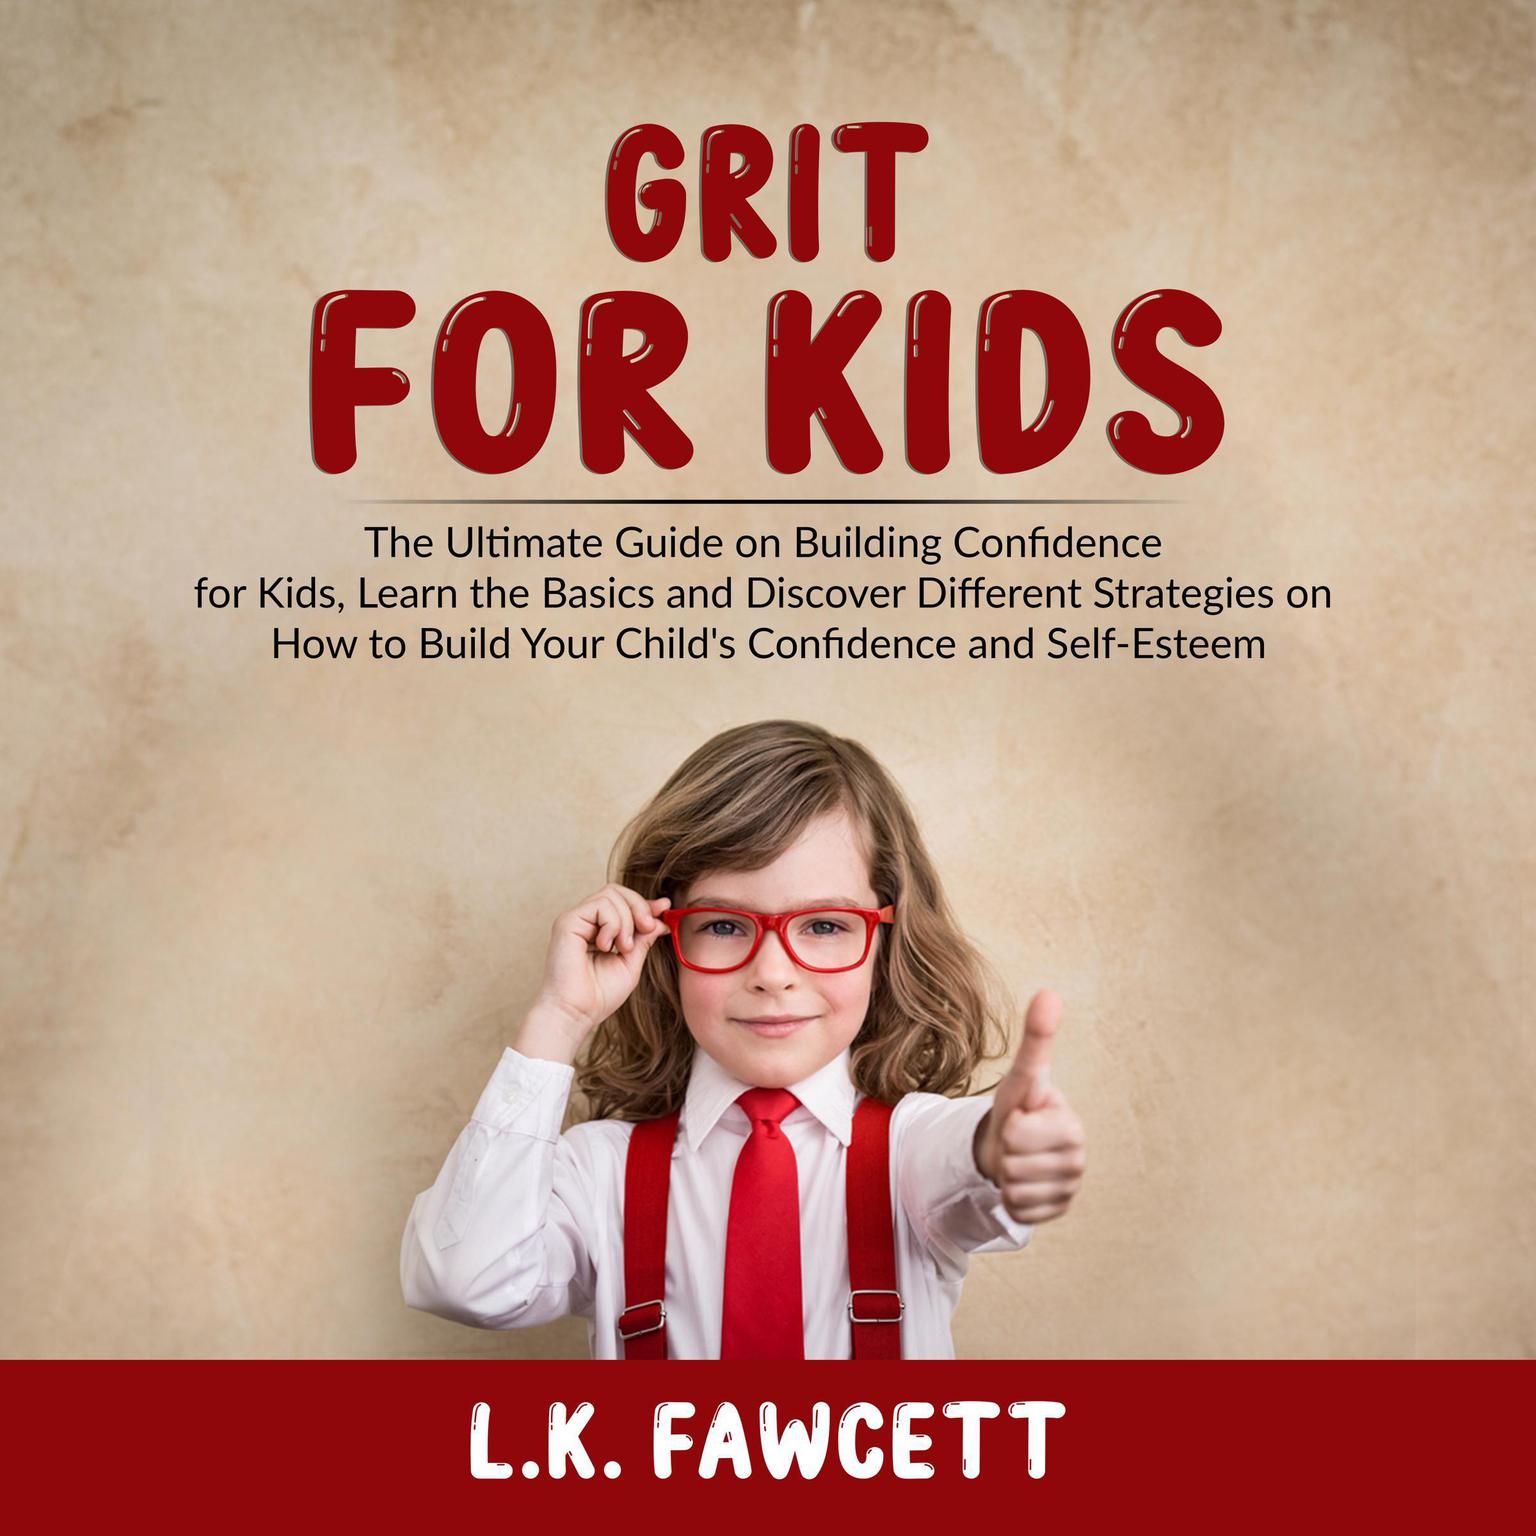 Grit for Kids: : The Ultimate Guide on Building Confidence for Kids, Learn the Basics and Discover Different Strategies on How to Build Your Child’s Confidence and Self-Esteem Audiobook, by L.K. Fawcett